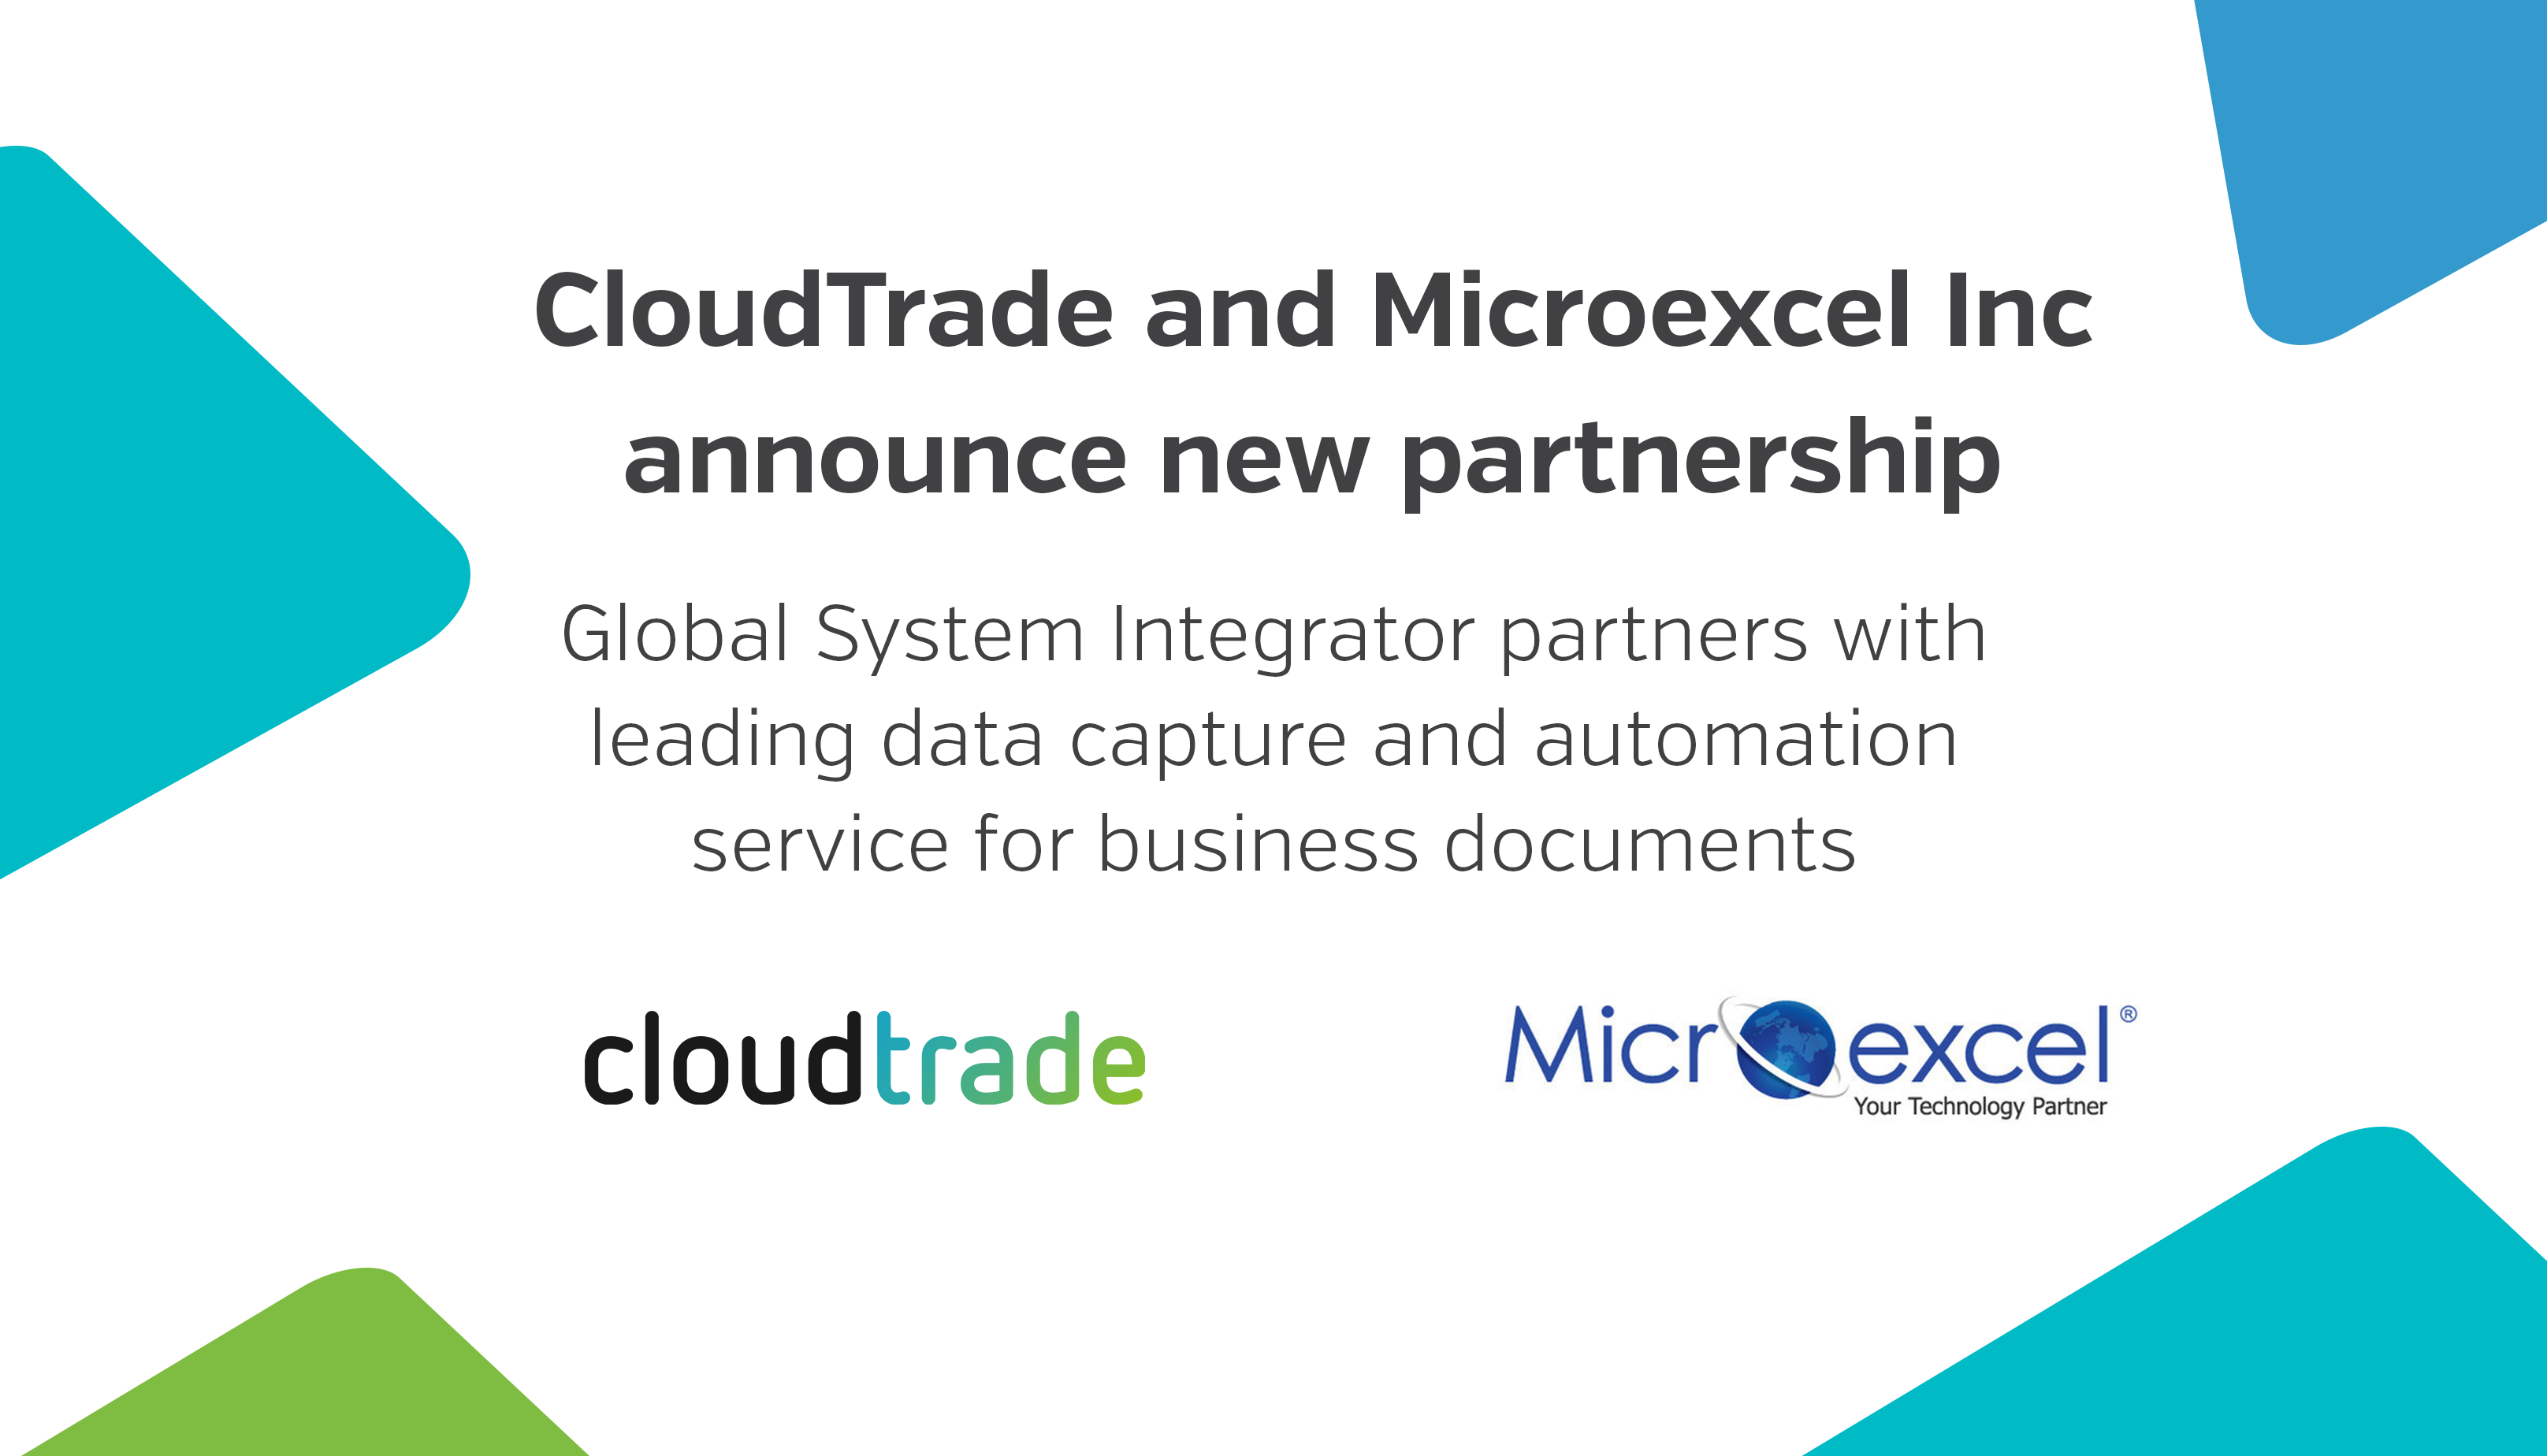 Microexcel Inc Announces Partnership With CloudTrade